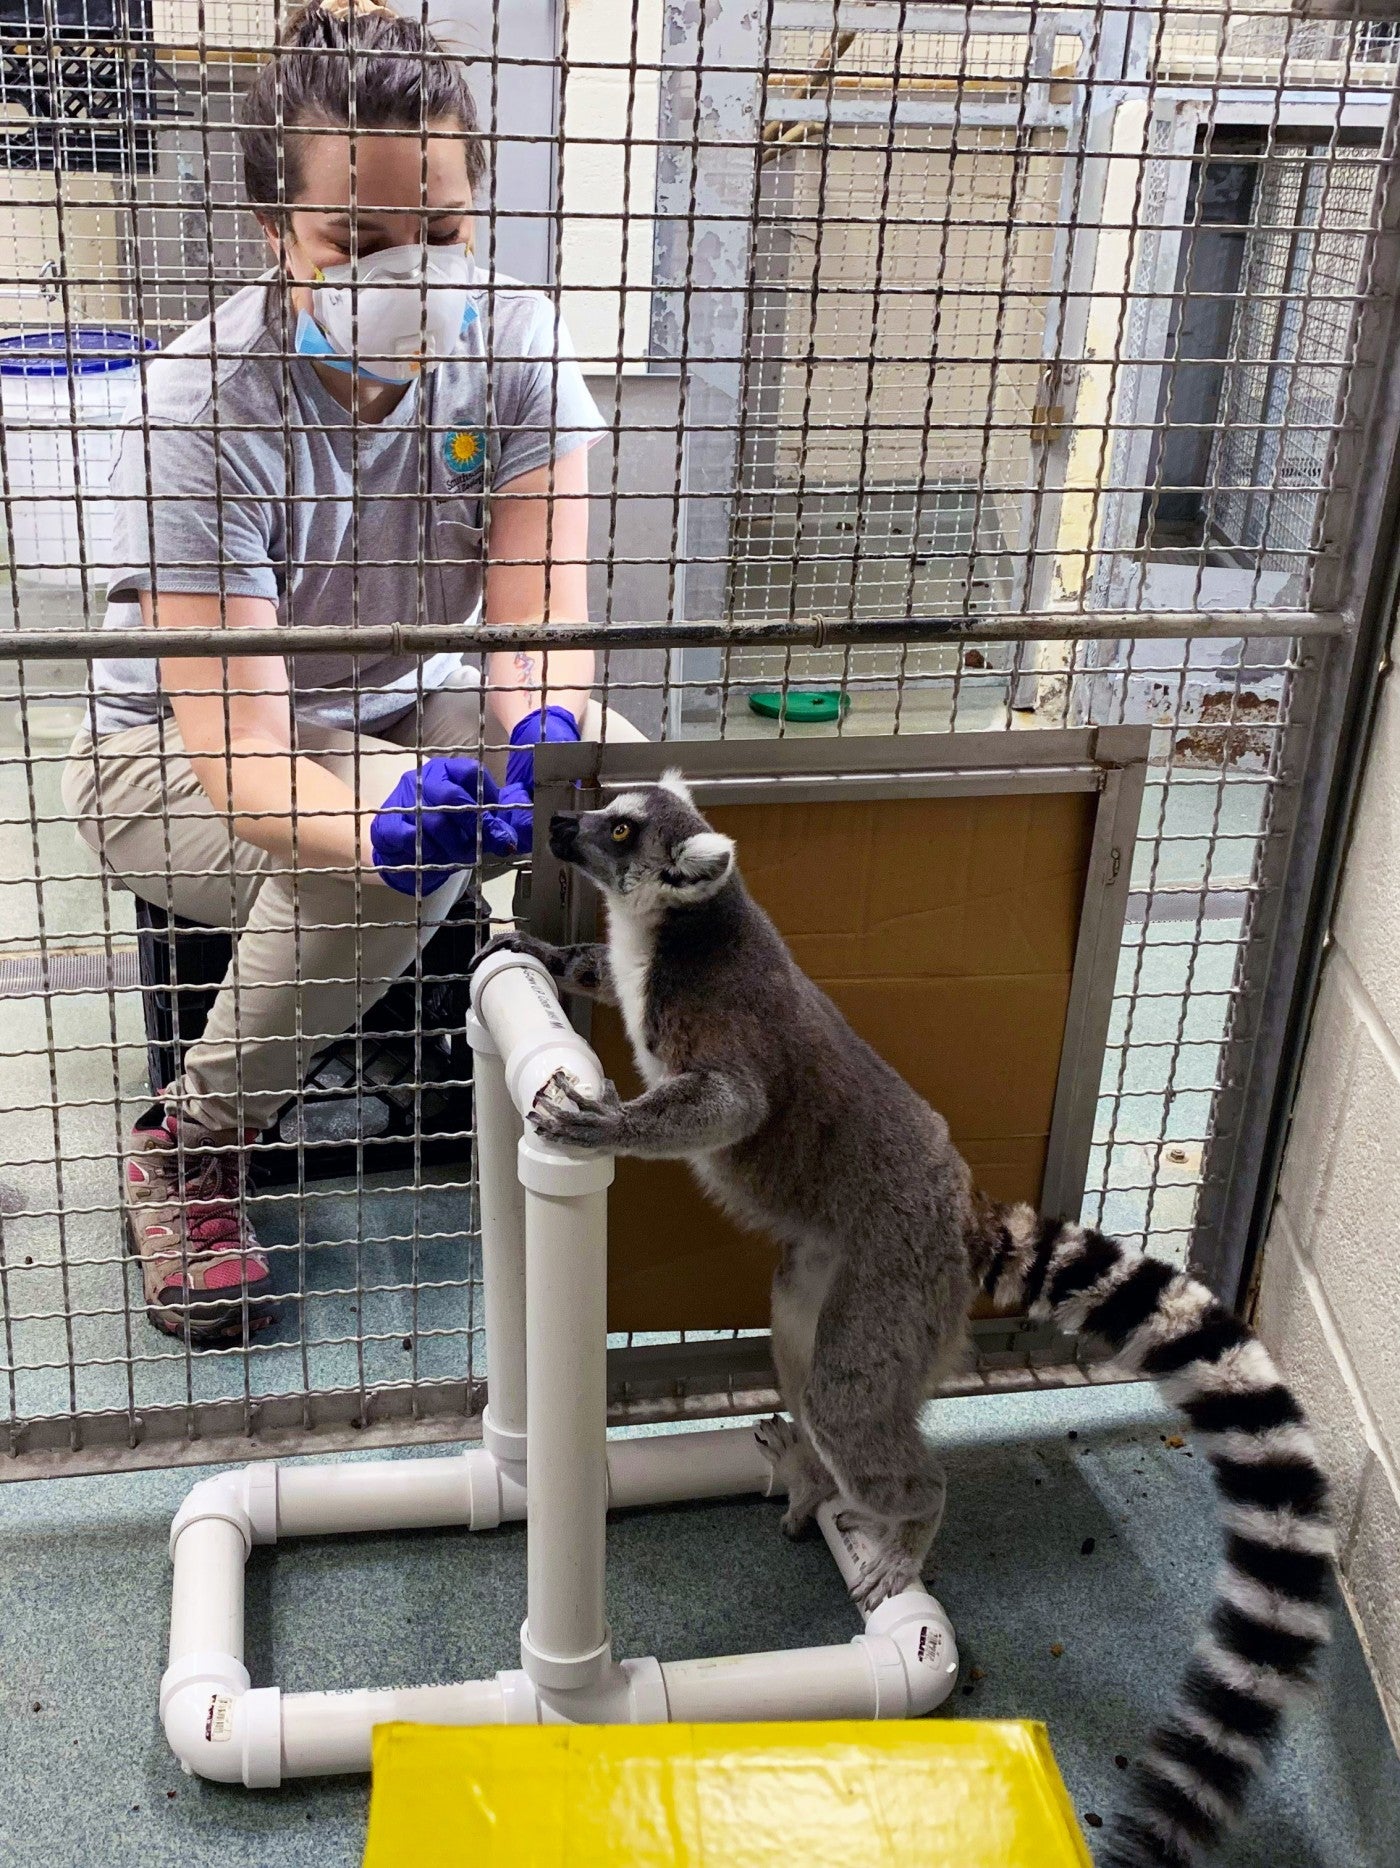 Primate keeper Lynne McMahan trains ring-tailed lemur Bowie to stand still for radiographs.